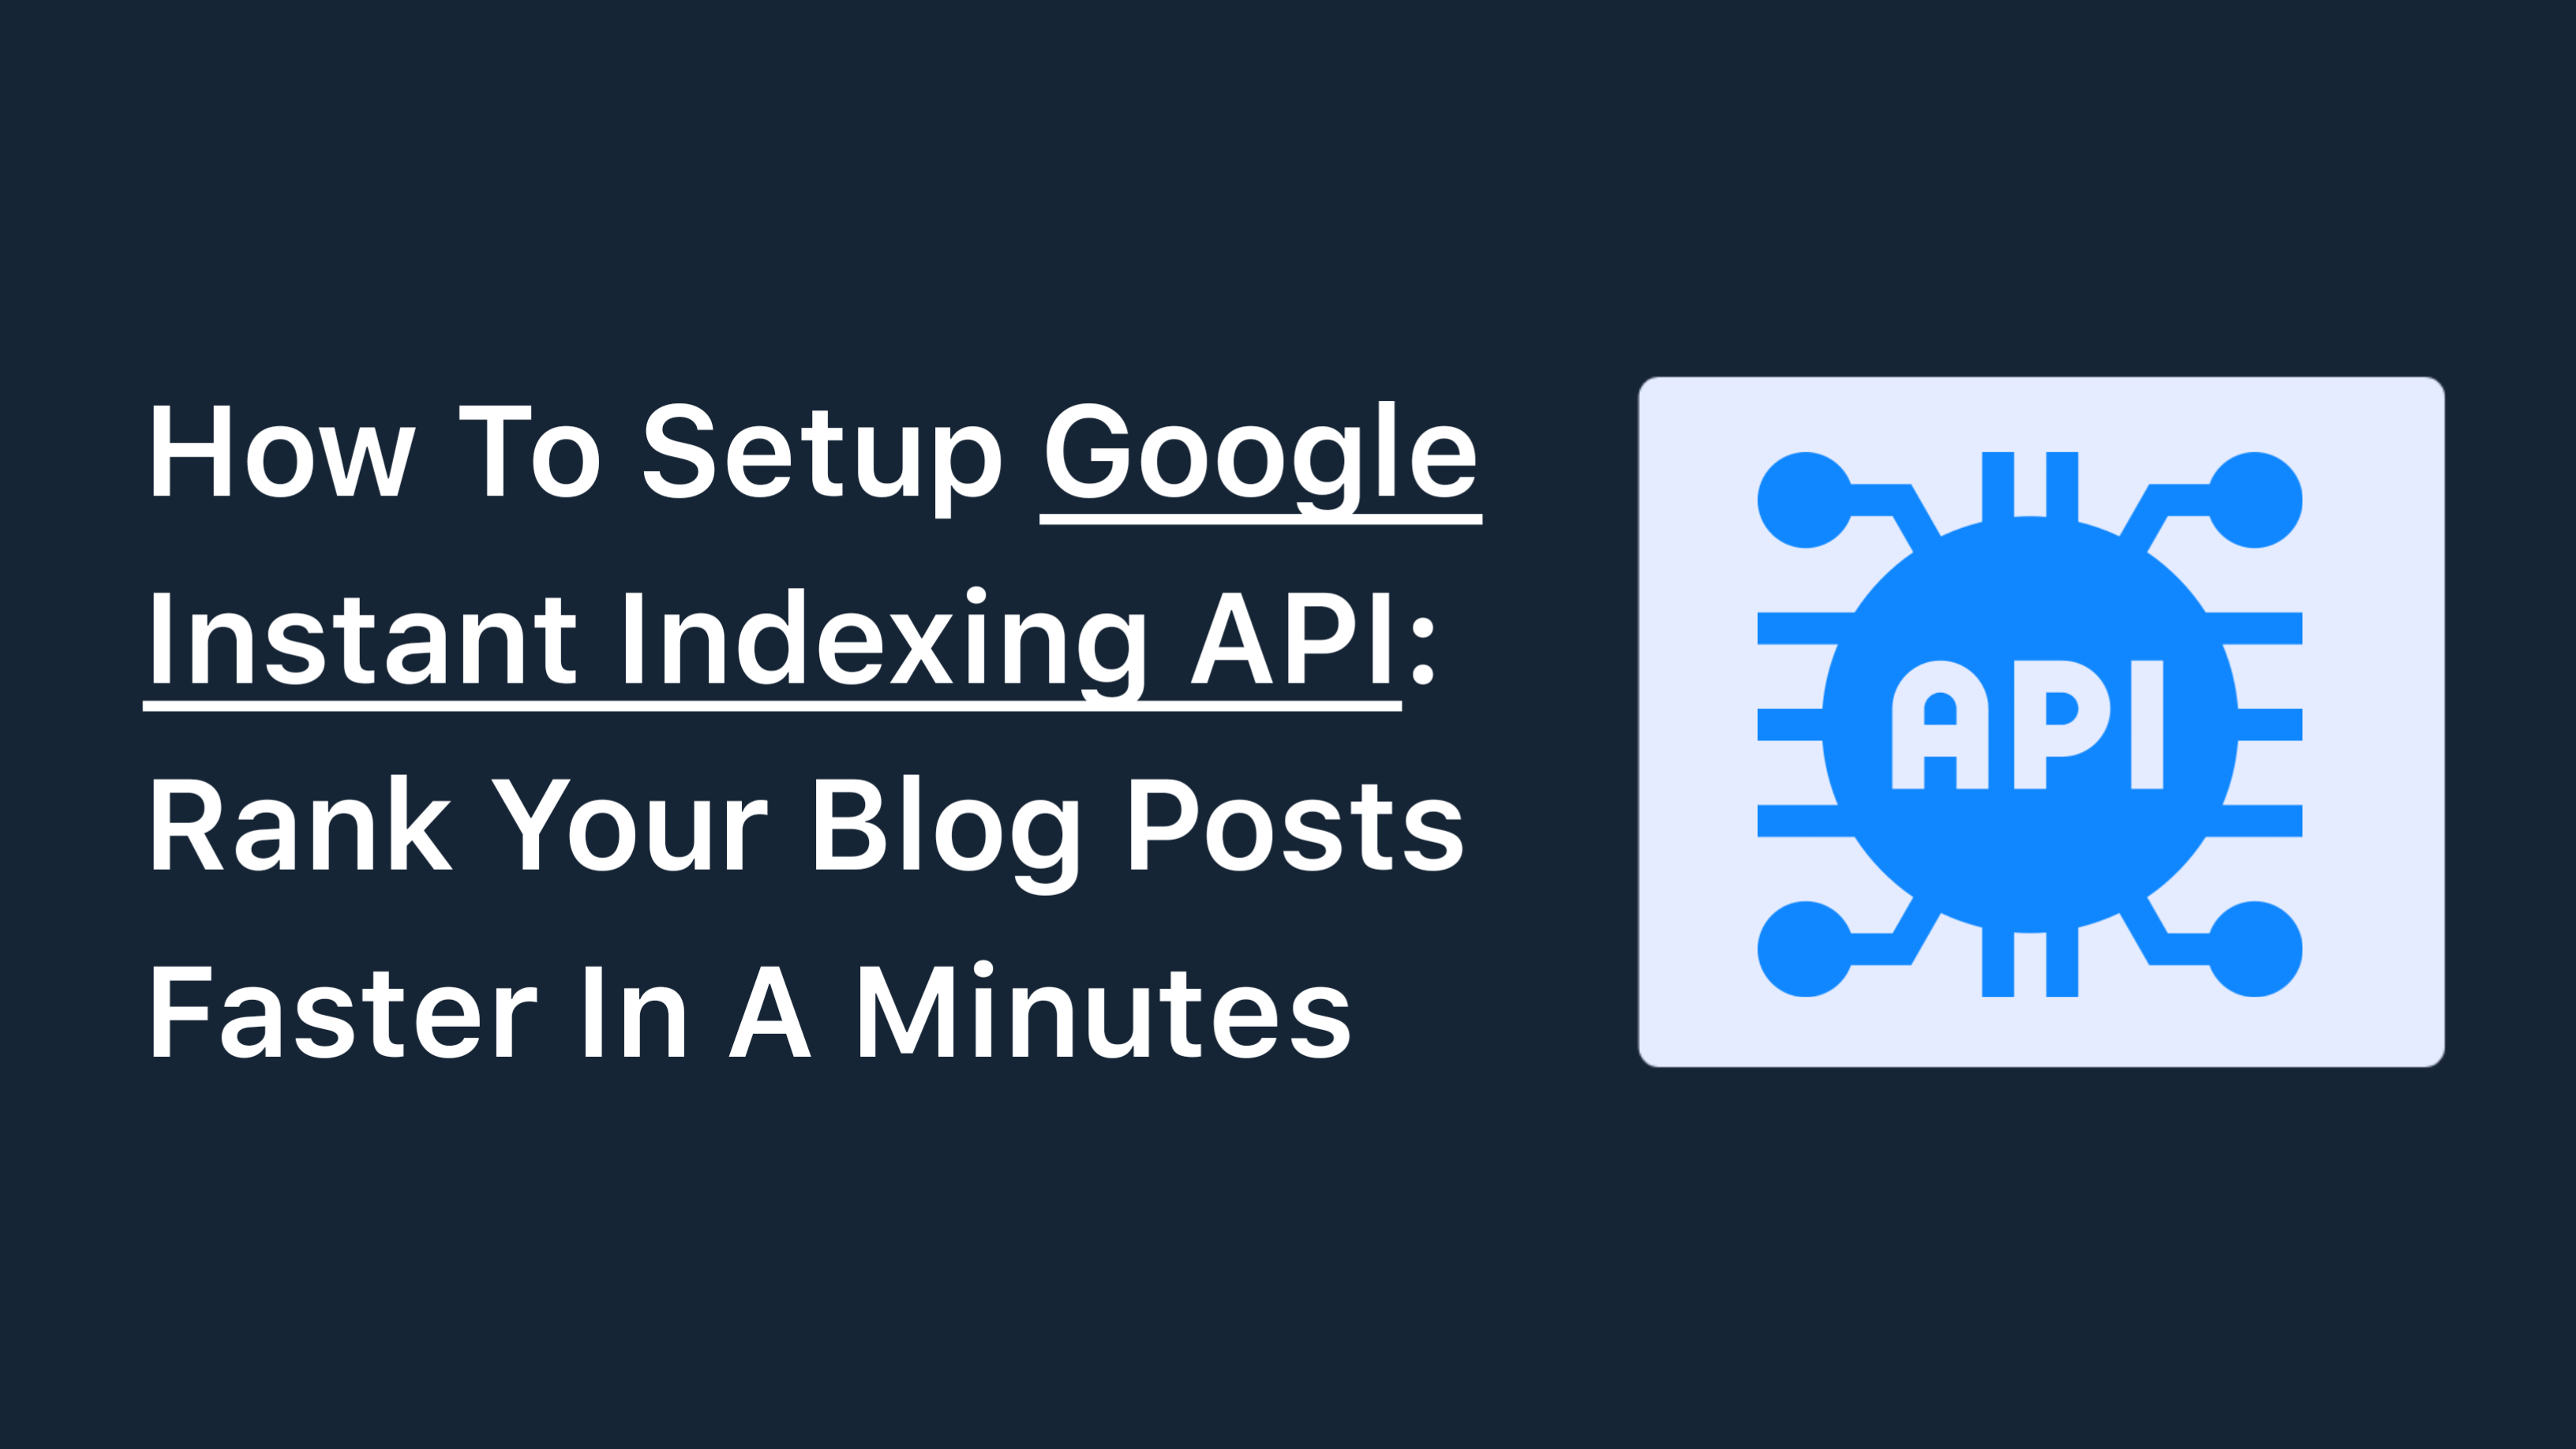 How To Setup Google Instant Indexing API: Rank Your Blog Posts Faster